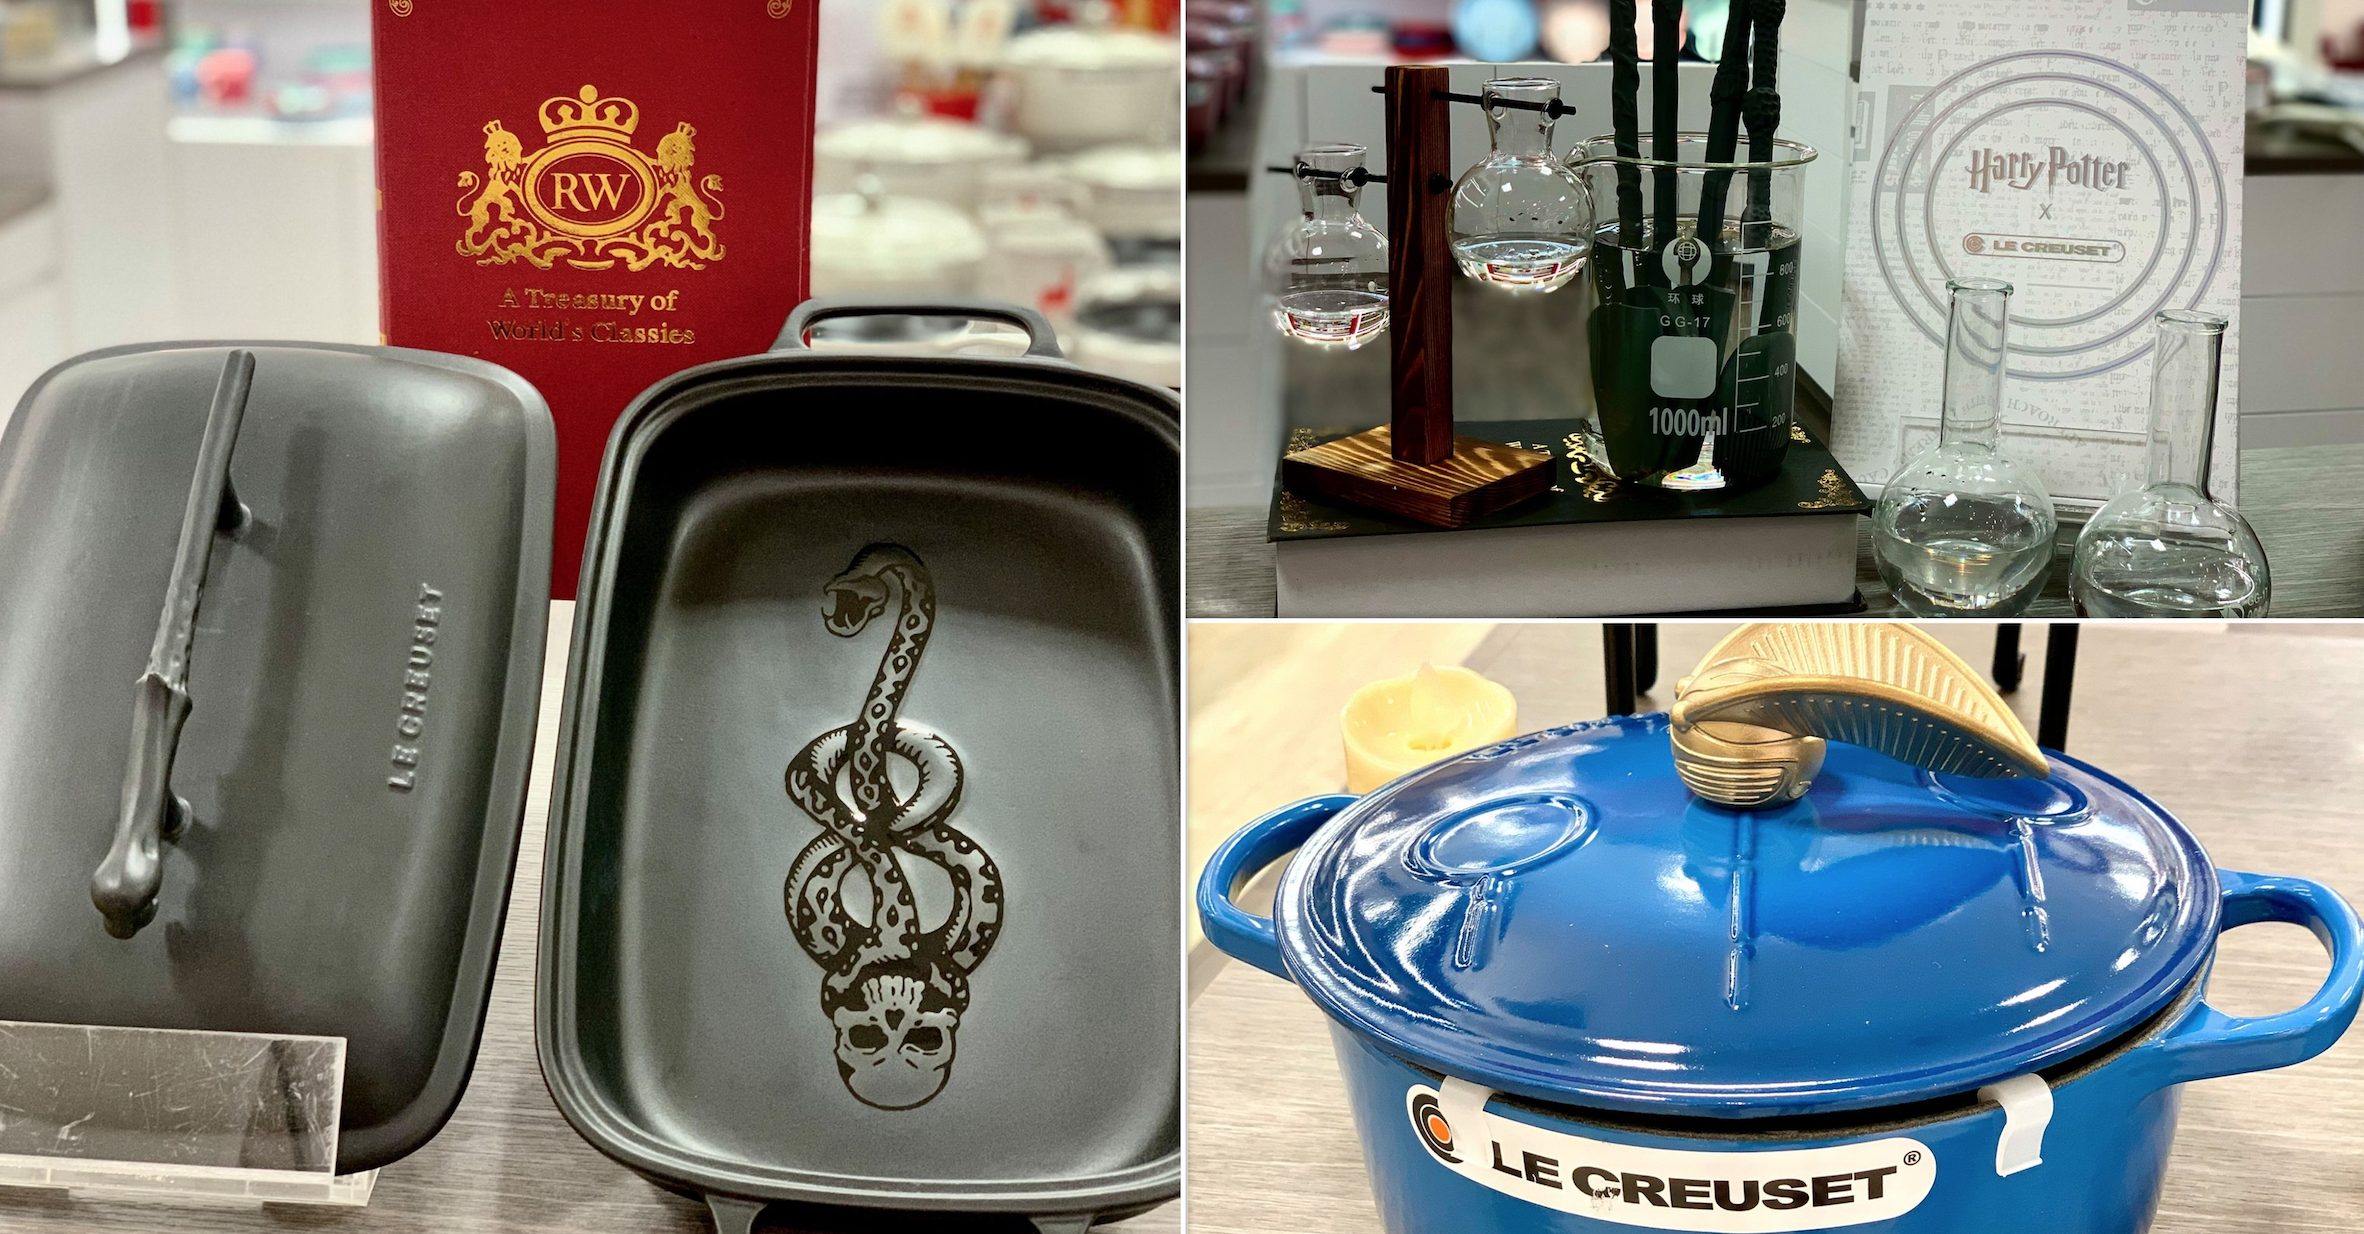 Harry Potter x Le Creuset collection now at Takashimaya S'pore, prices from  S$109 -  - News from Singapore, Asia and around the world